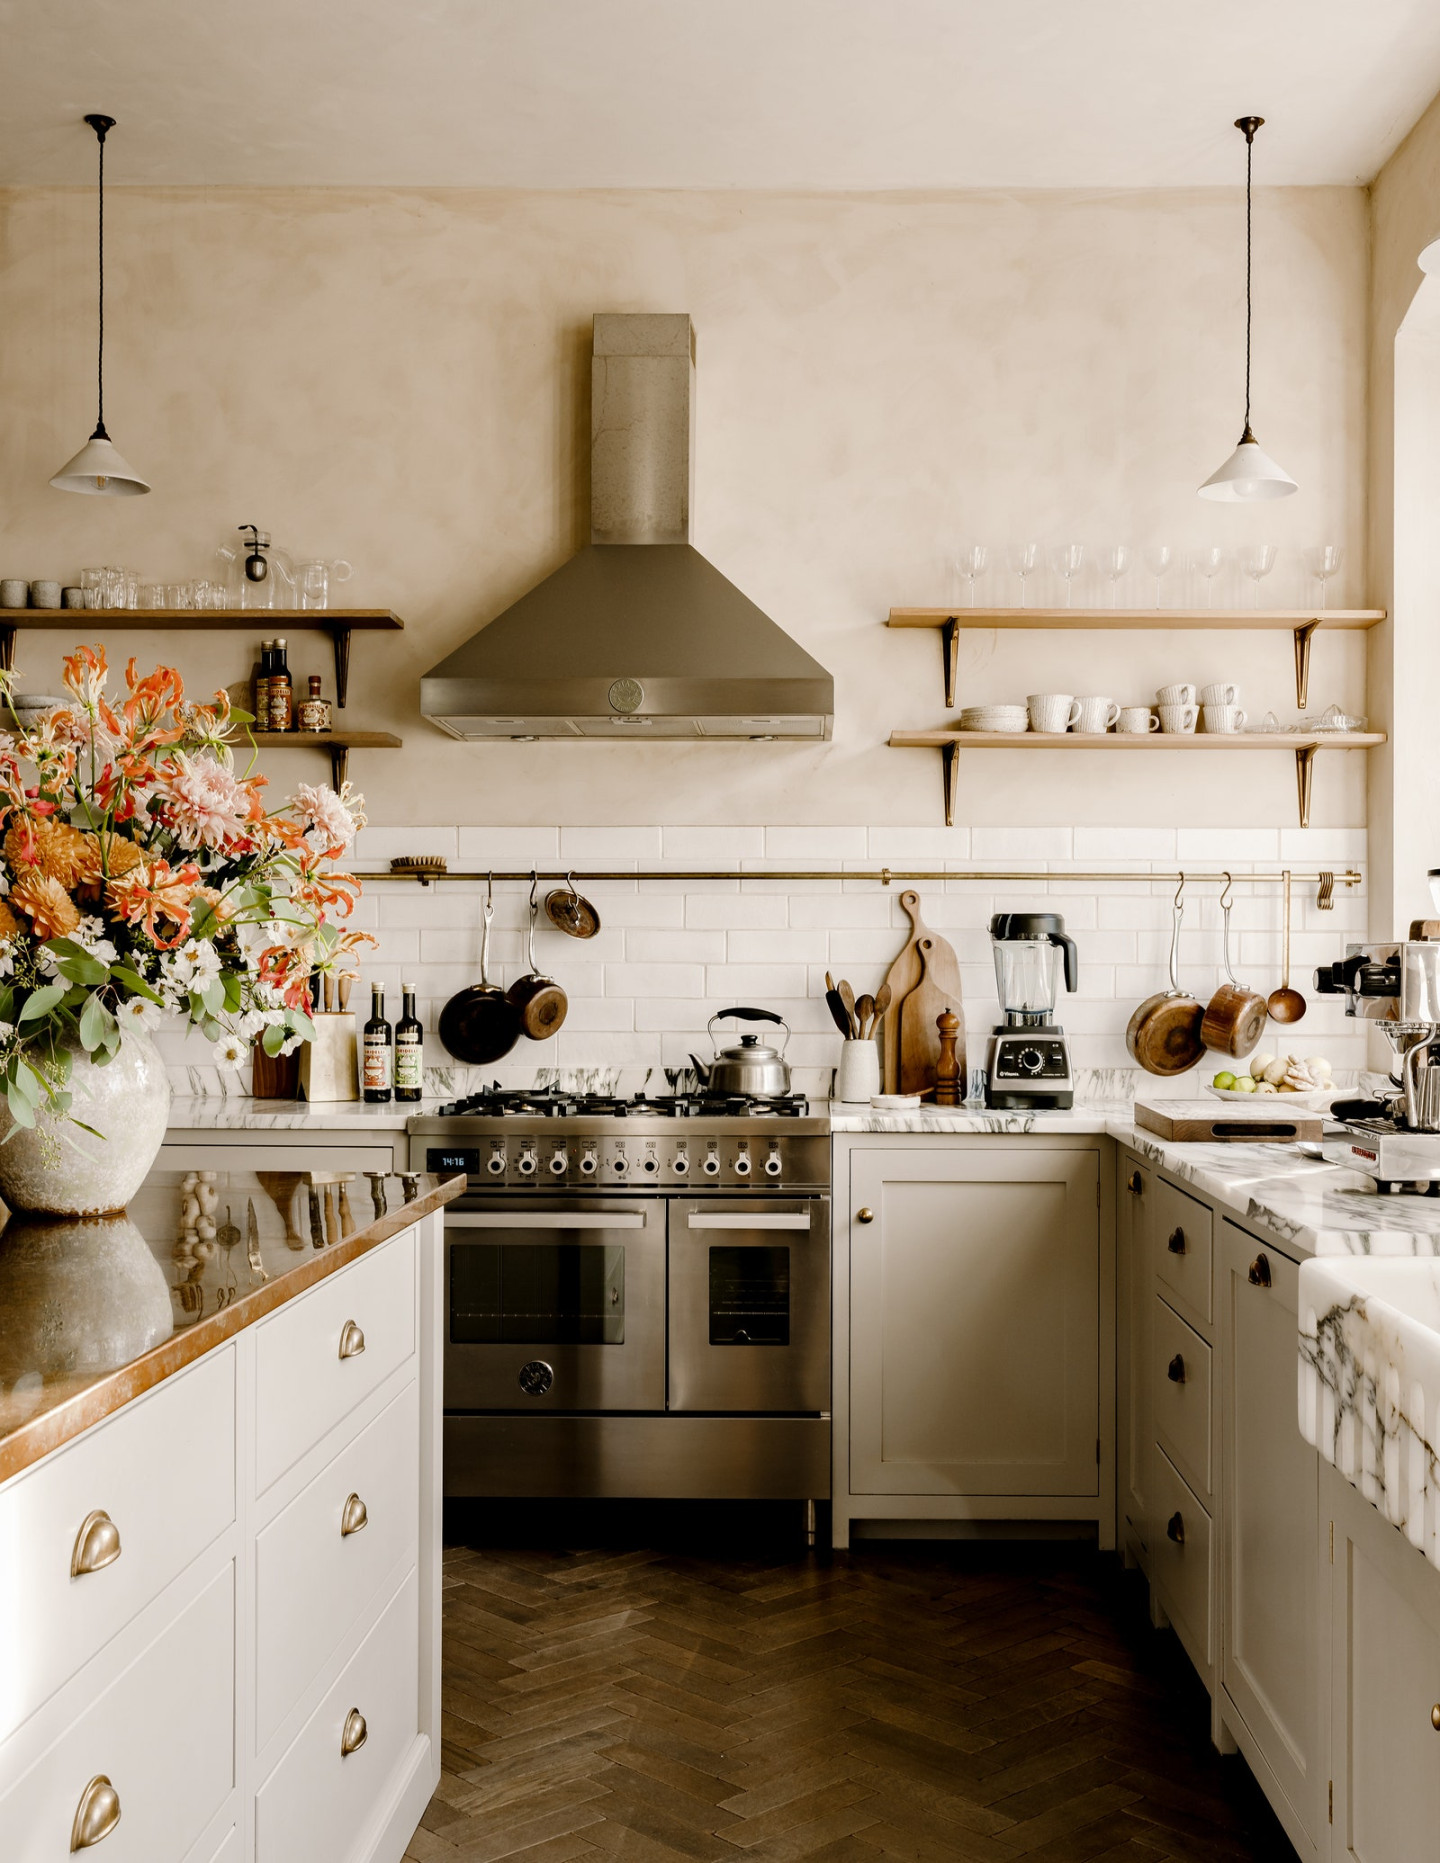 Three kitchen organising rules to follow, according to a